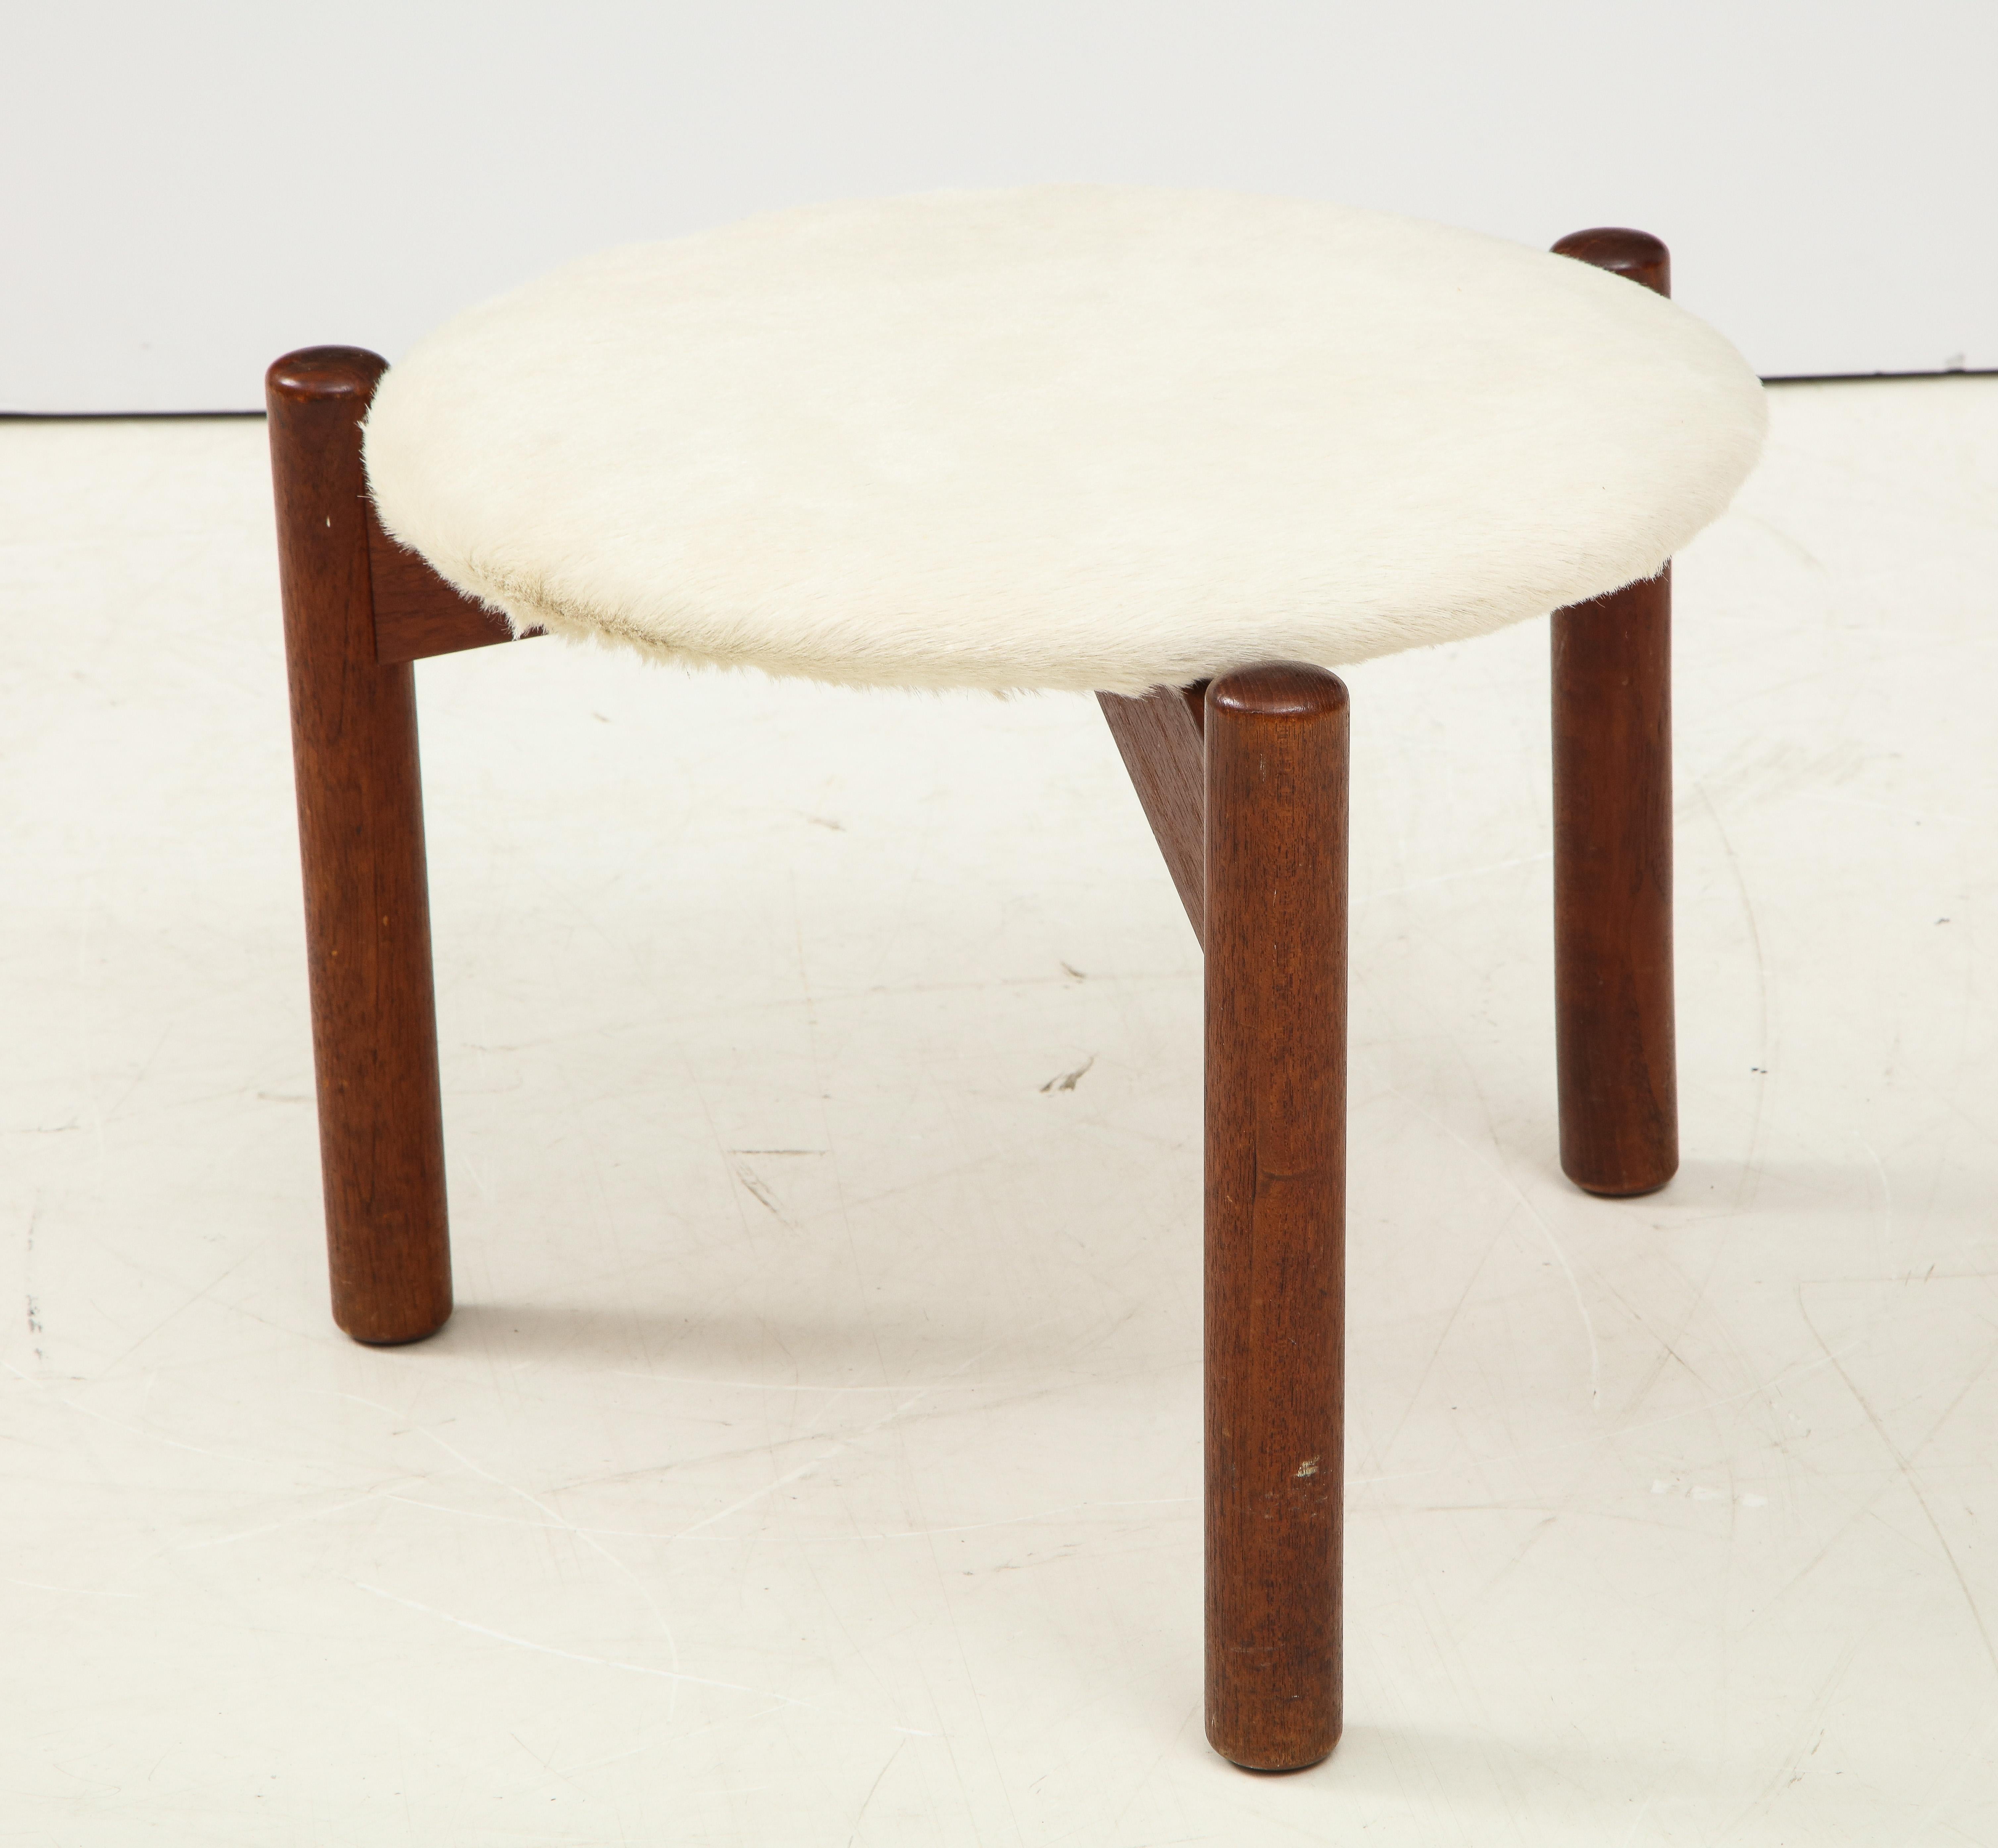 Vintage Mid-Century Danish Tripod Stool with Cow Hair In Good Condition For Sale In New York City, NY